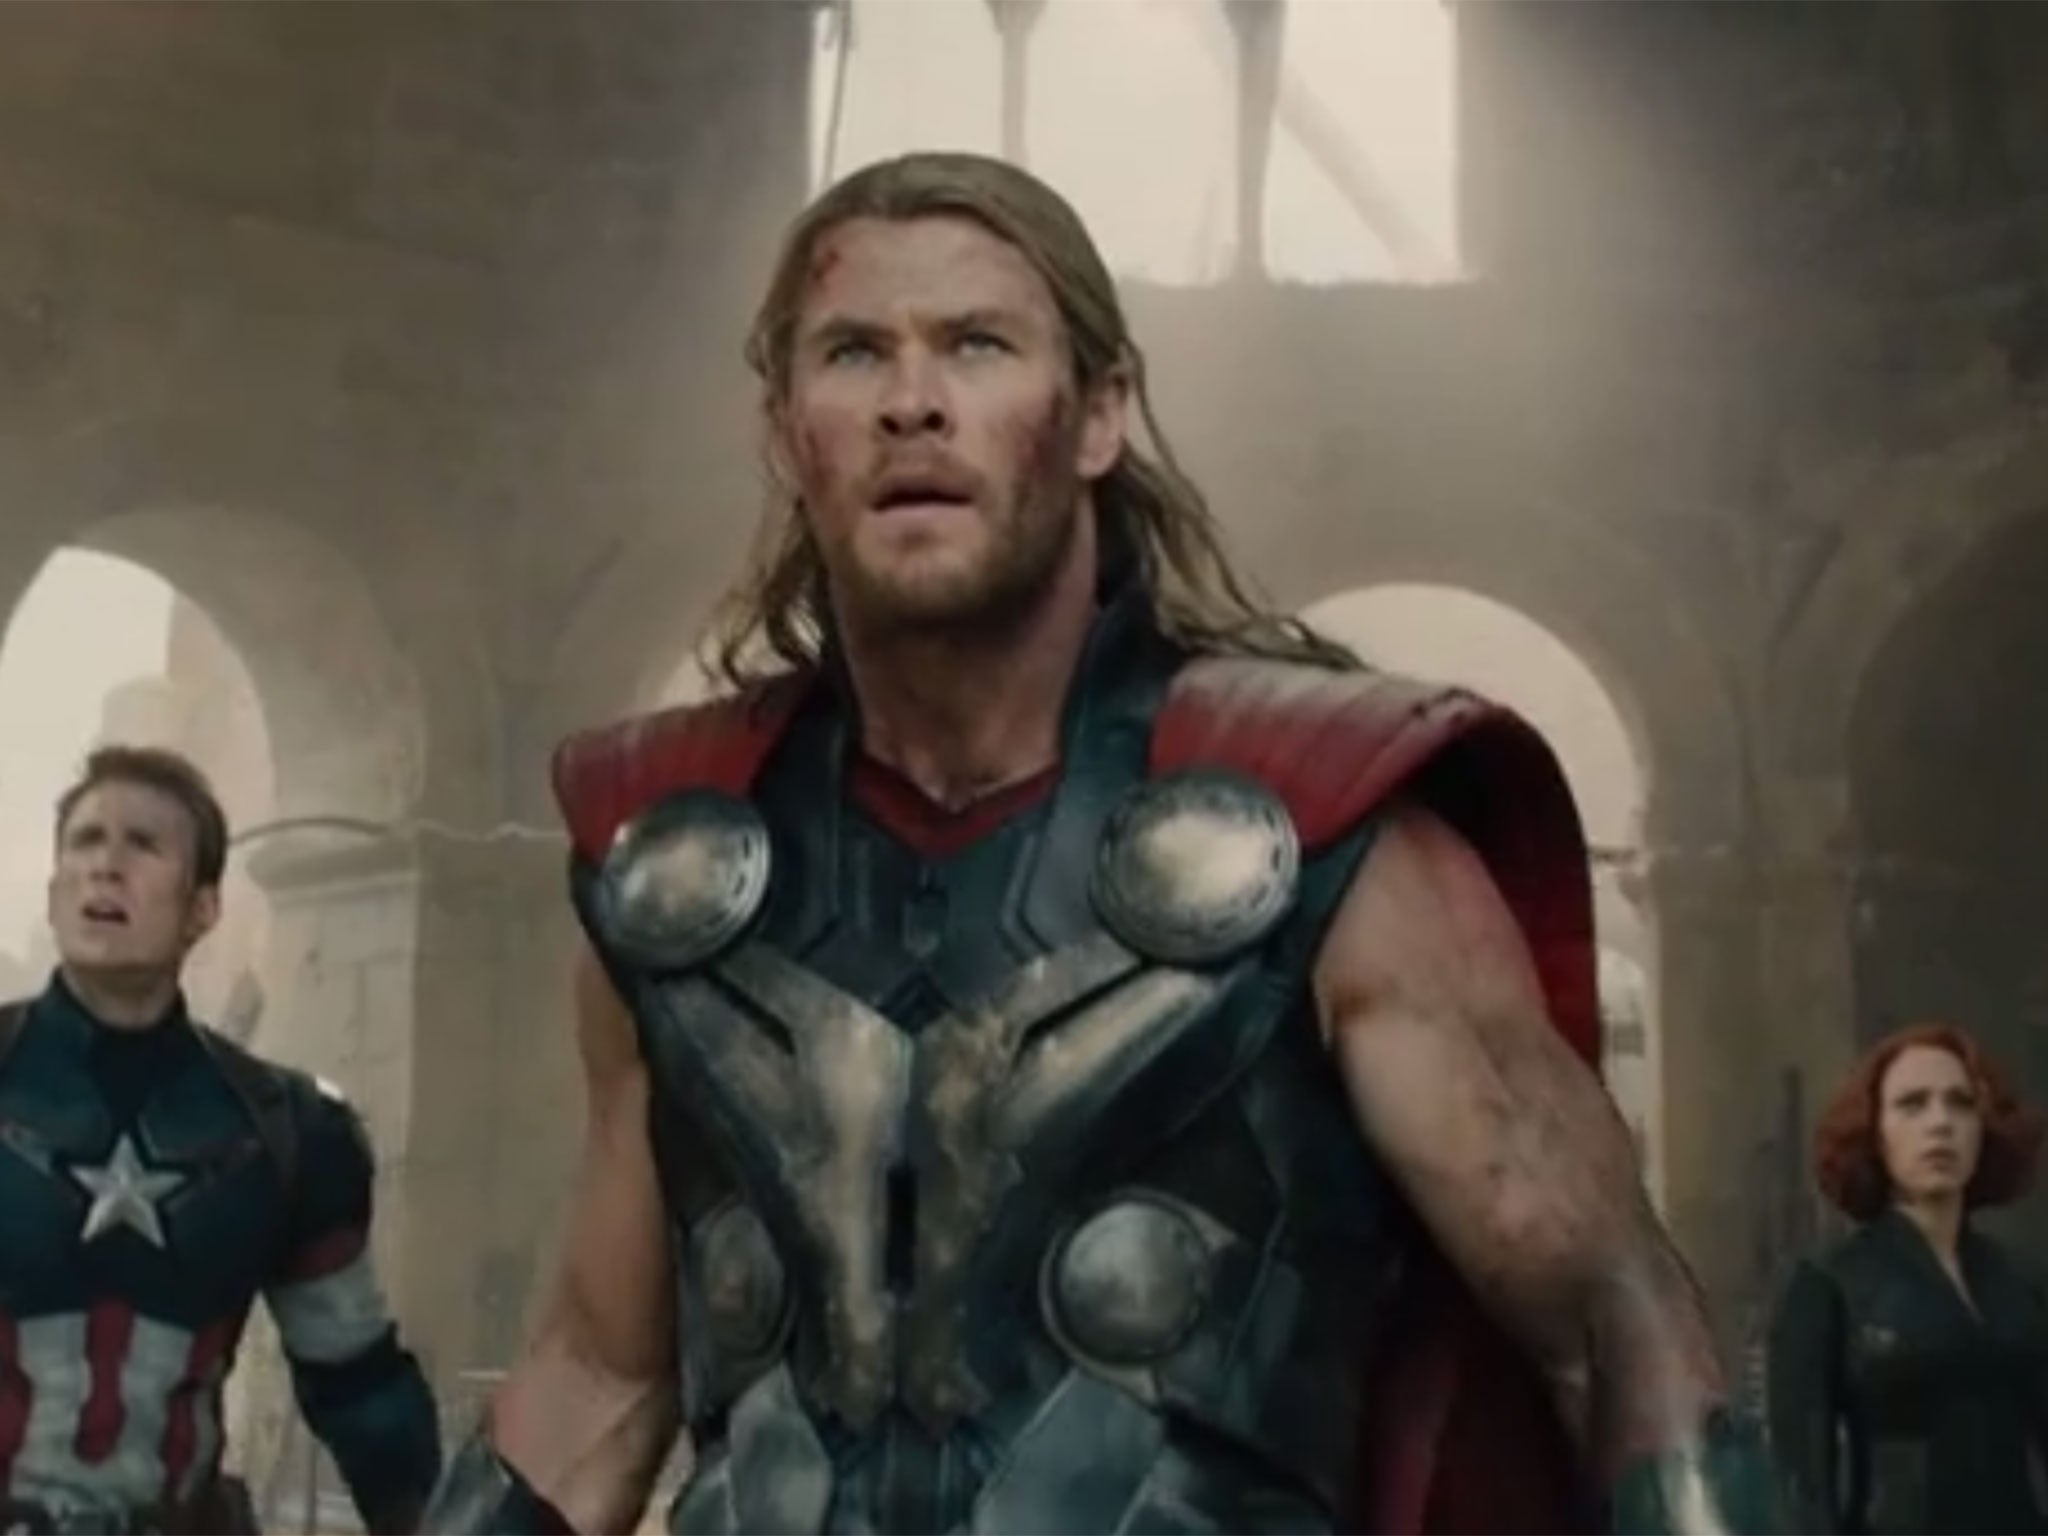 Chris Hemsworth stars as Thor in Avengers: Age of Ultron